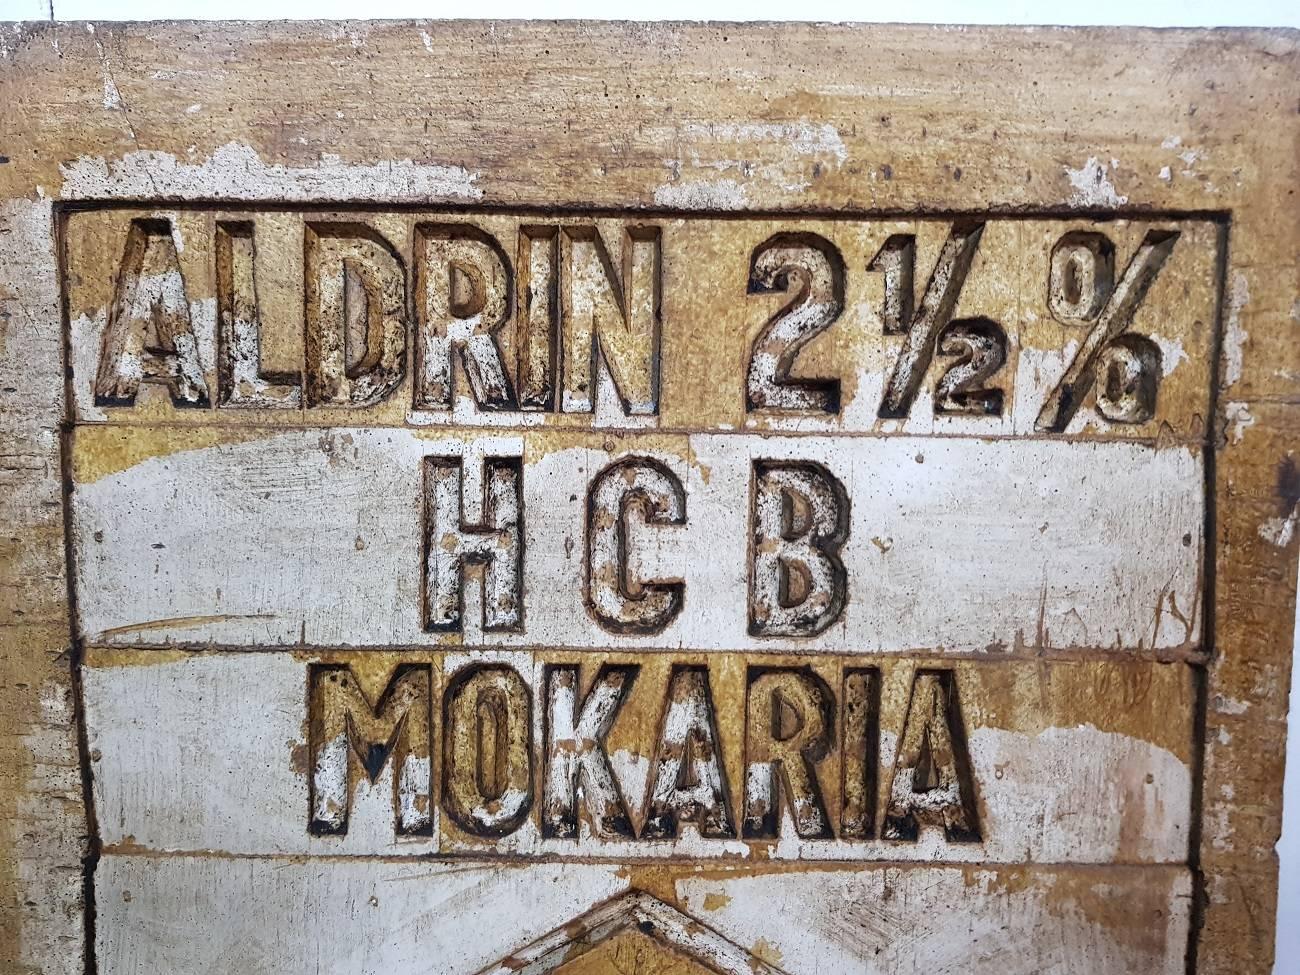 This is a one of a kind Rare Dutch plaster mold and made in the mid of the 20th century, these where used to make a rubber stamp for bags or other export items. With the text "Aldrin 21/2 % H C B Mokaria BX 3743 via Matadi", so the